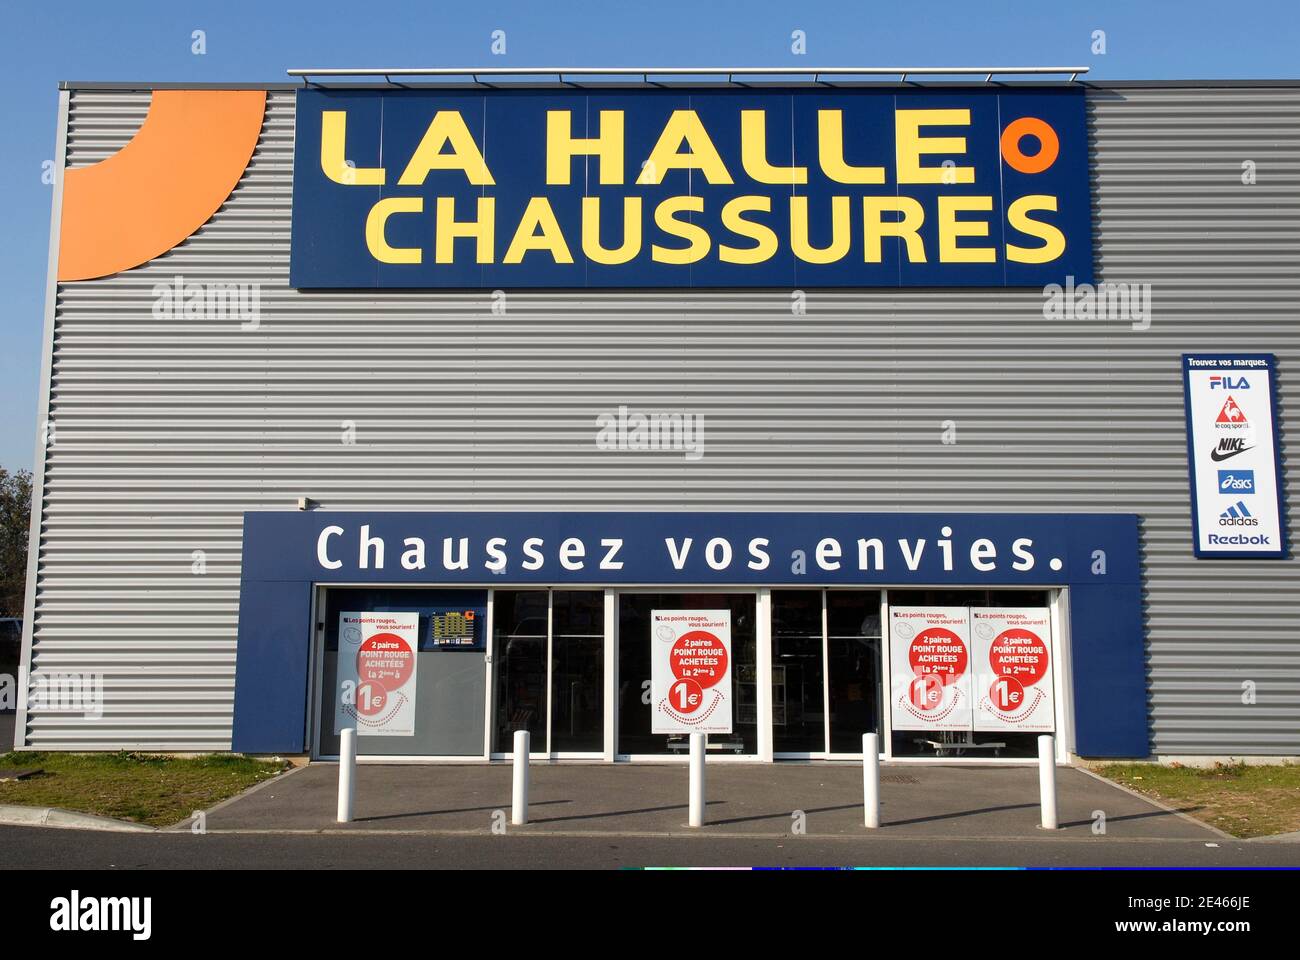 La Halle O Chaussures sign board in France. Photo by Philippe  Montigny/ABACAPRESS.COM Stock Photo - Alamy